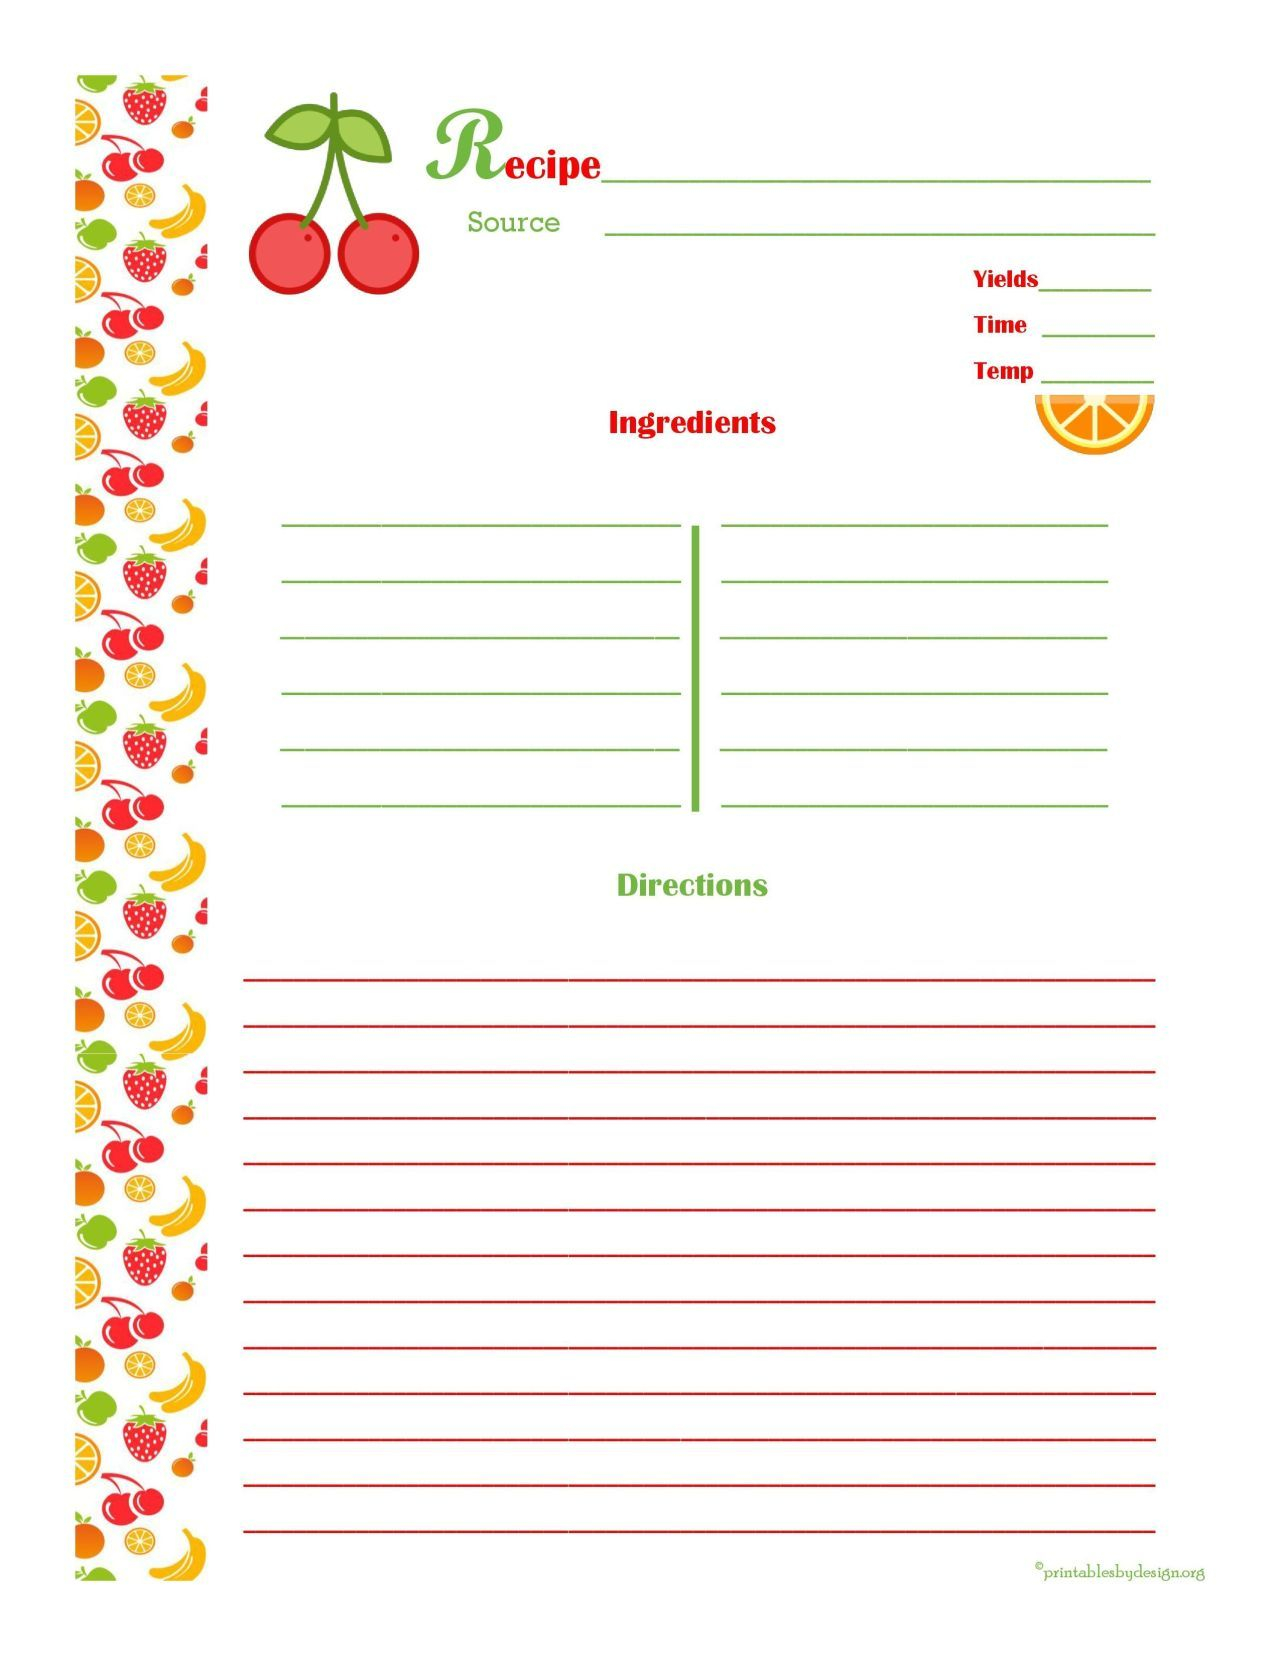 Free Editable Recipe Card Templates For Microsoft Word FREE DOWNLOAD